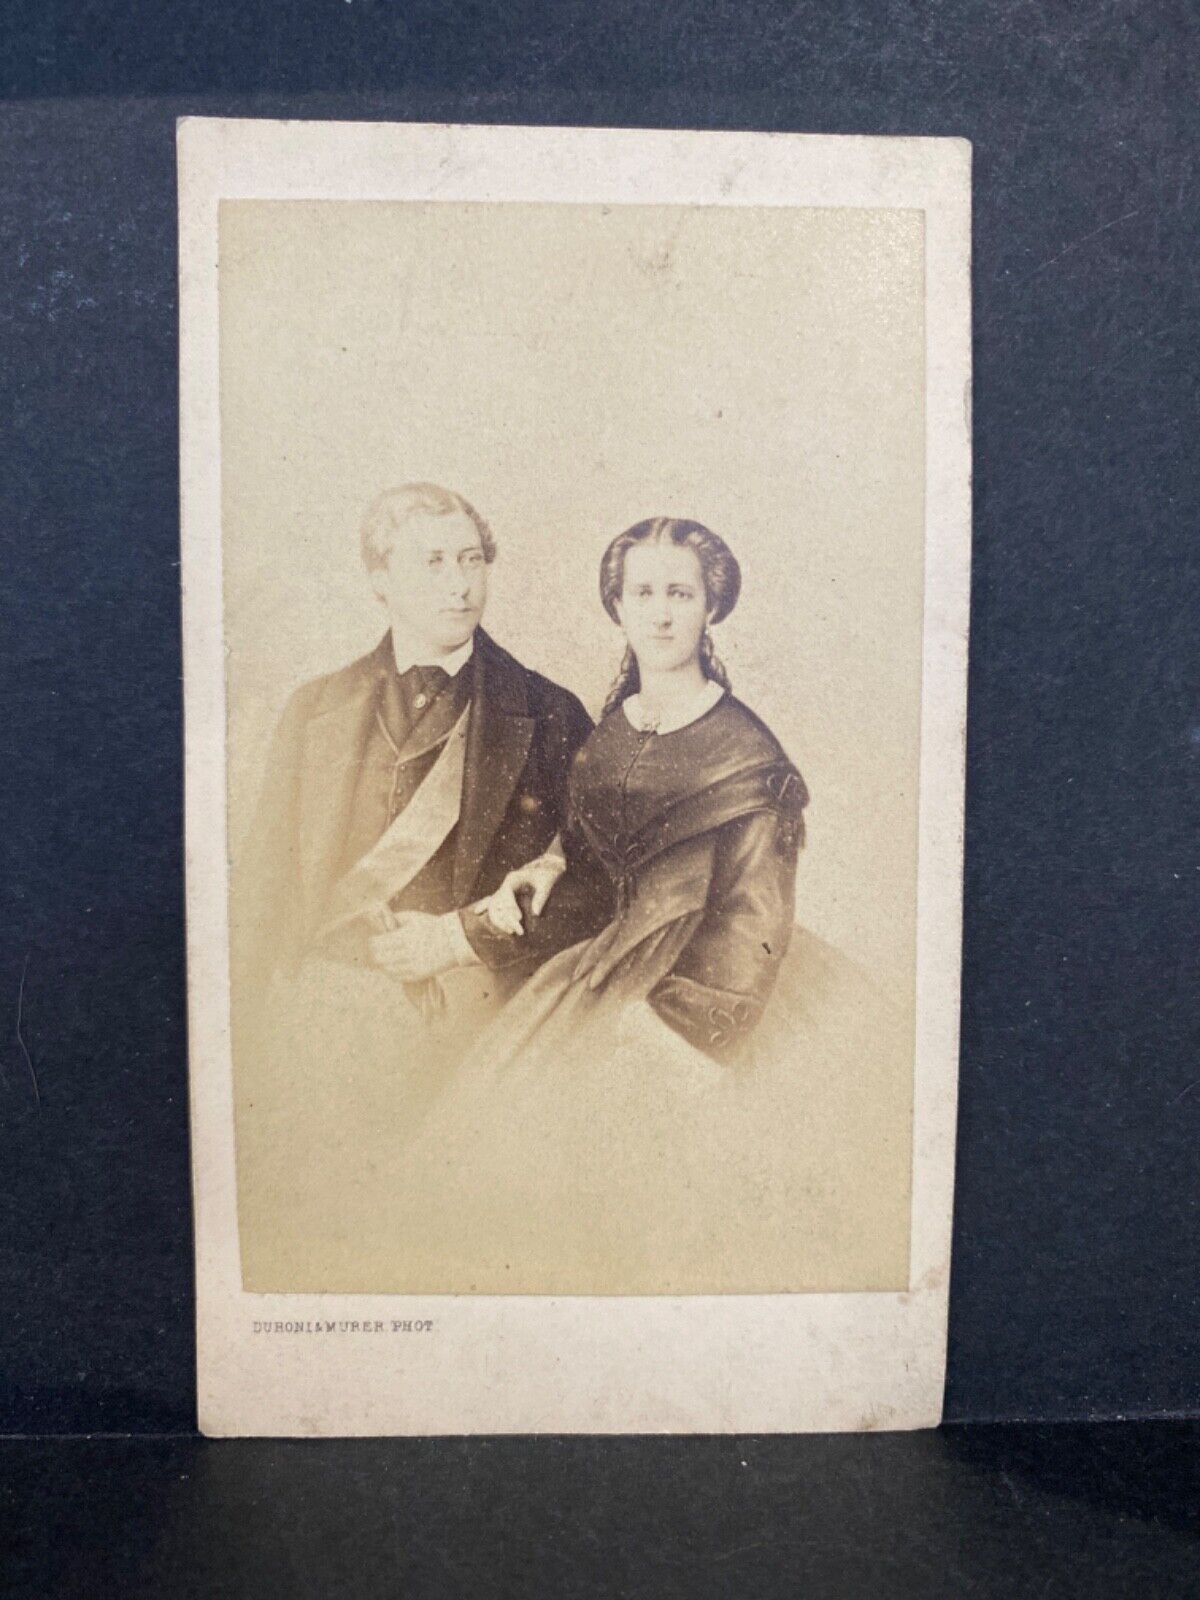  Antique French cdv photo Prince & Princess of Wales by Duroni & Murer Paris